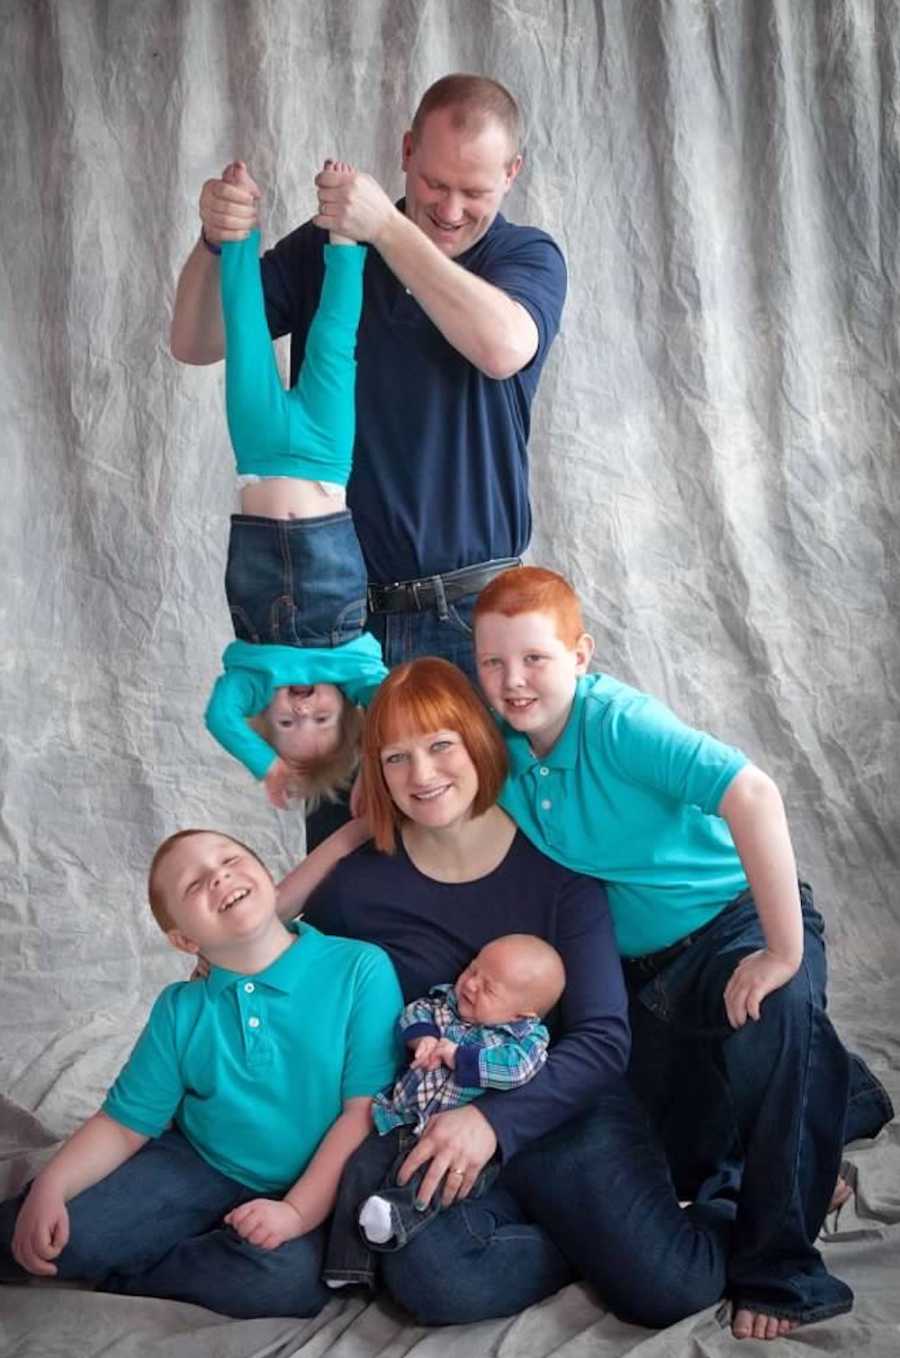 ‘Any chance you’re interested in adopting a redhead?’ We went from 0 to 3 kids. Two weeks later, we were pregnant.’: Couple battling infertility become parents to 10 after miracle pregnancies, adoption 6